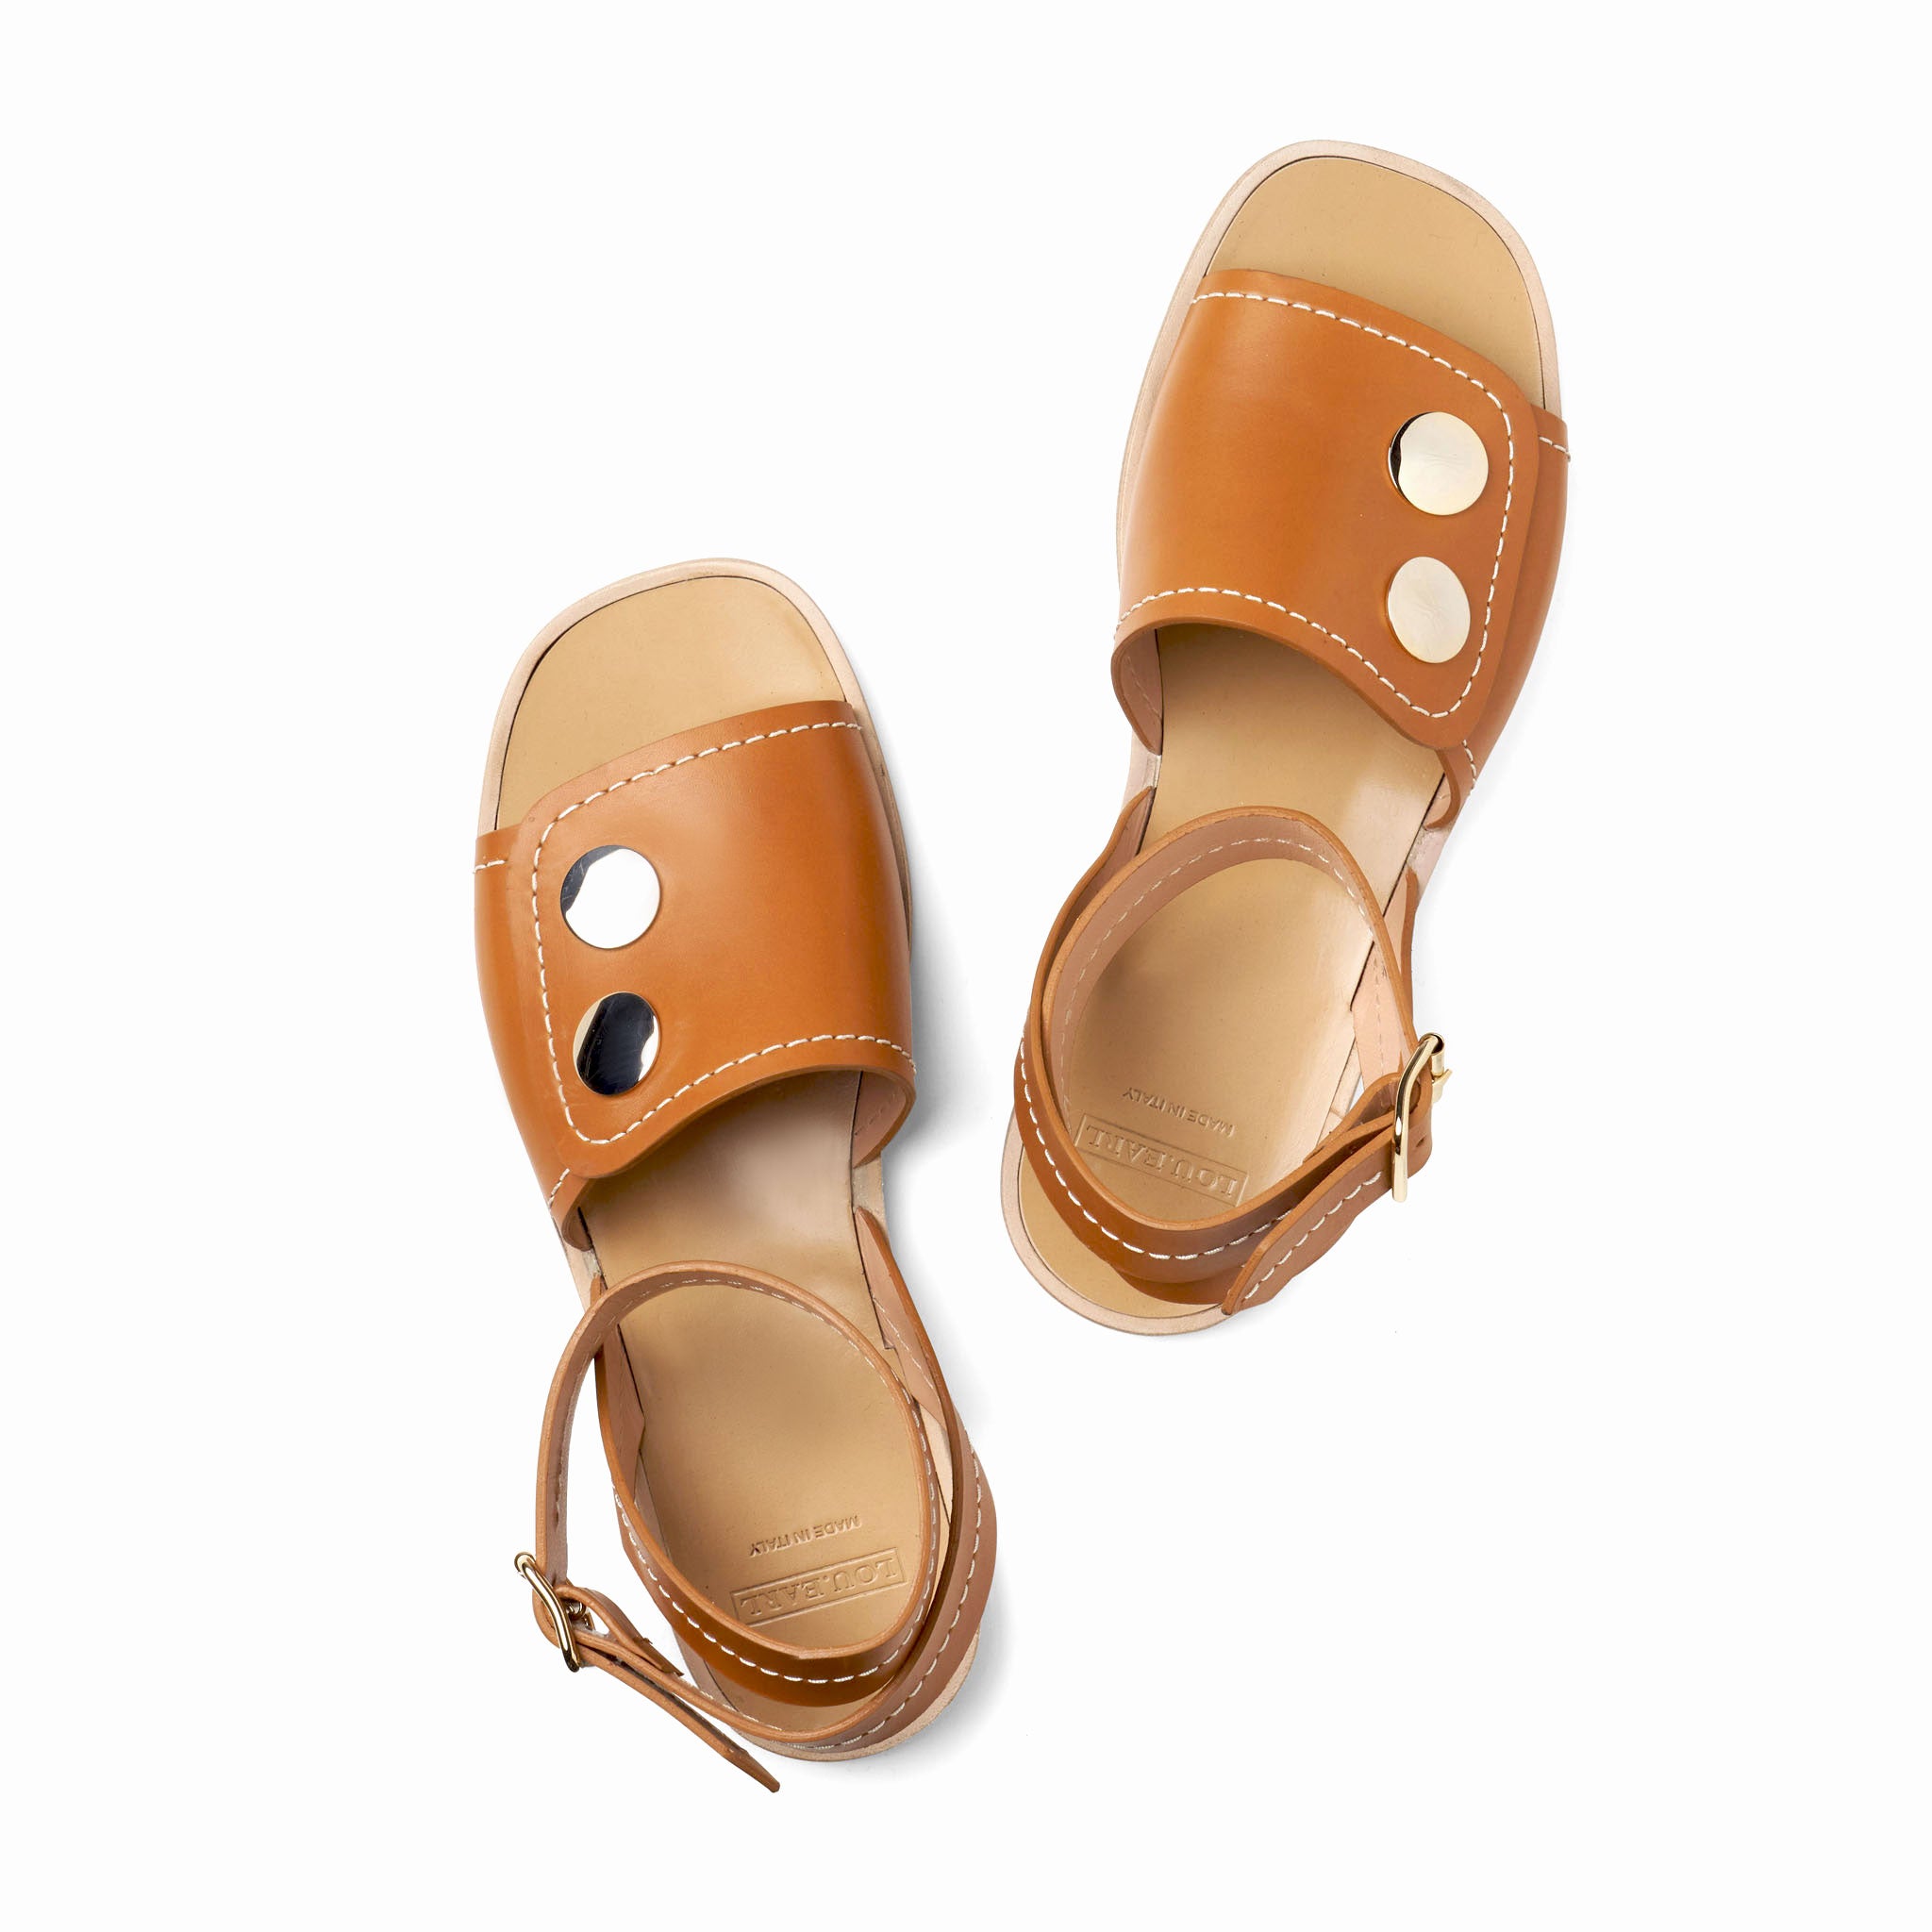 brown leather artisan sandals open toe with ankle strap for women with thick stitching details and gold hardware luxury sandals